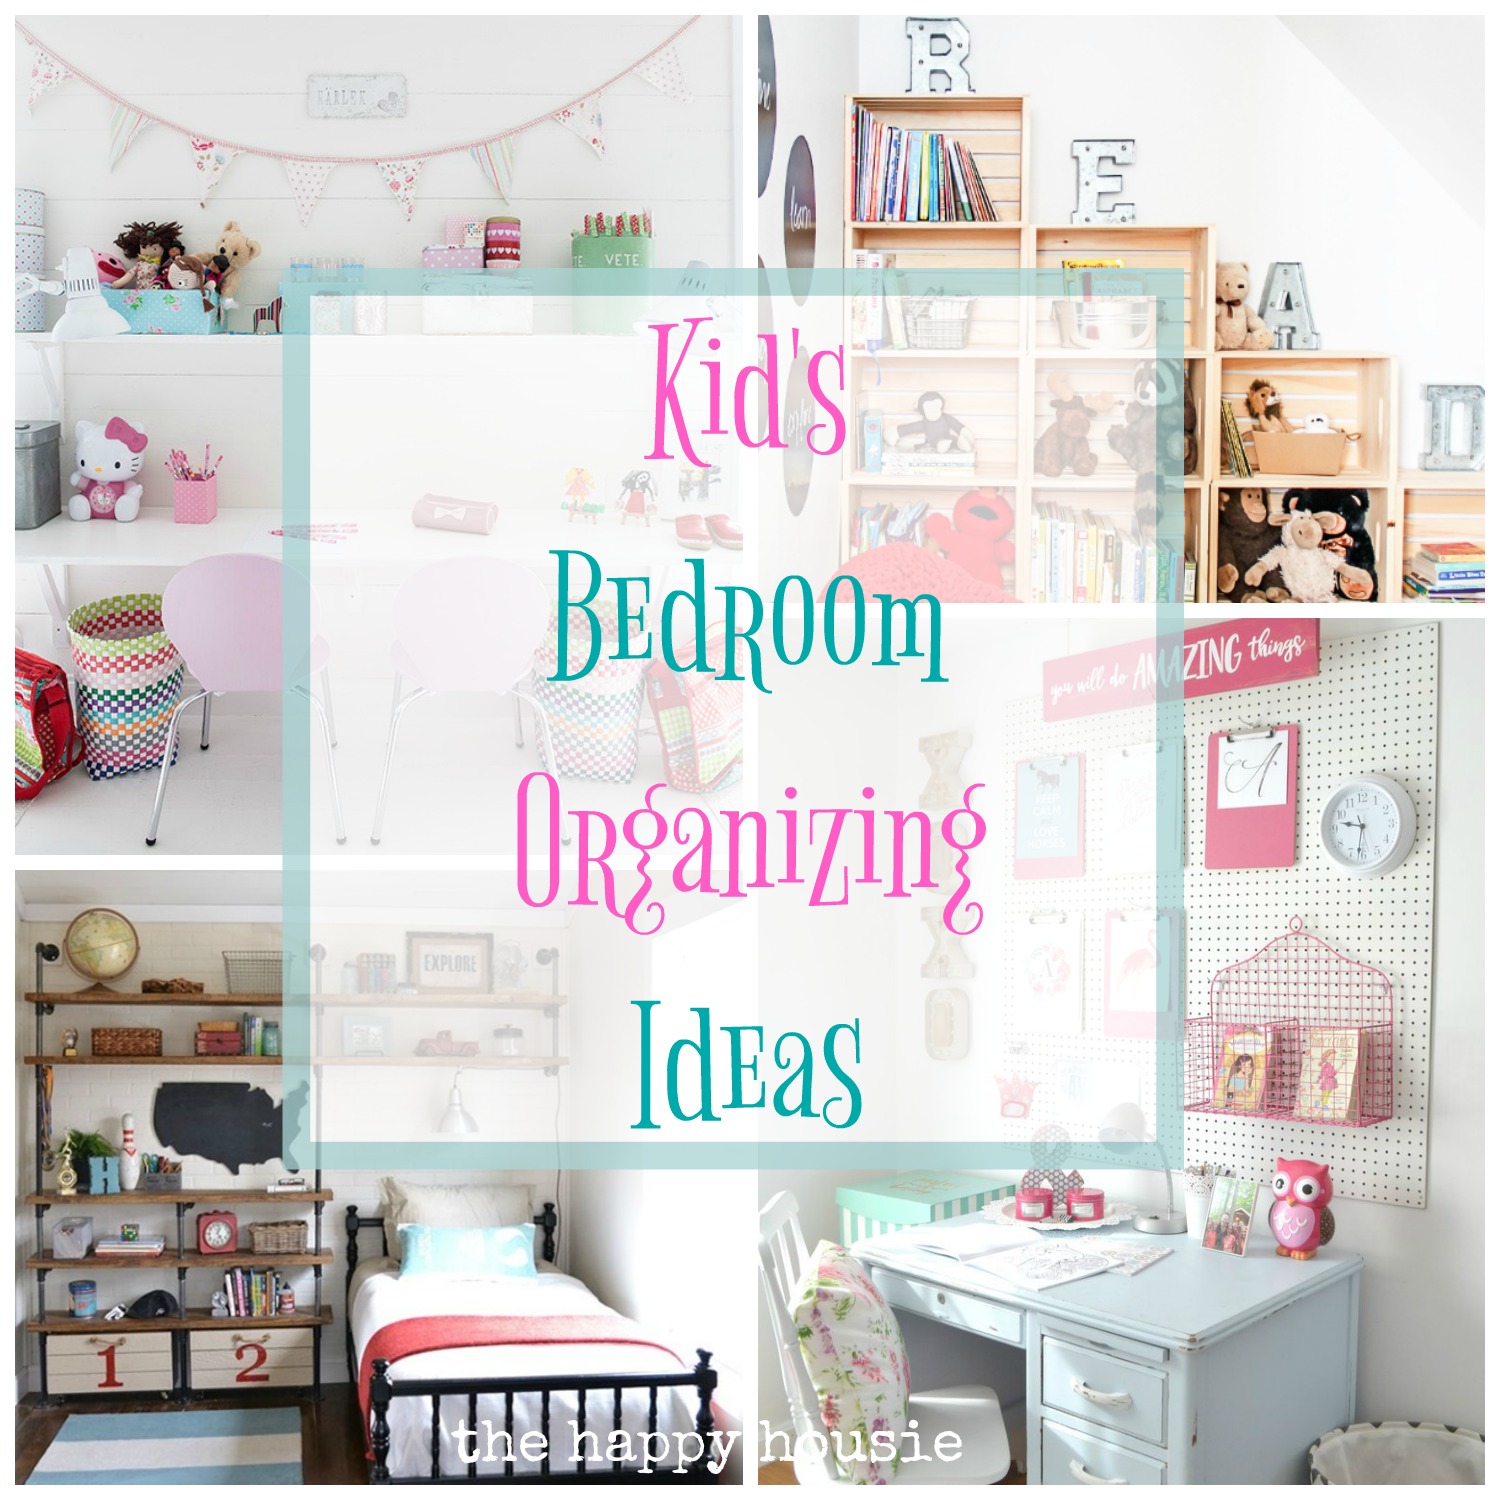 Fantastic Ideas for Organizing Kid’s Bedrooms